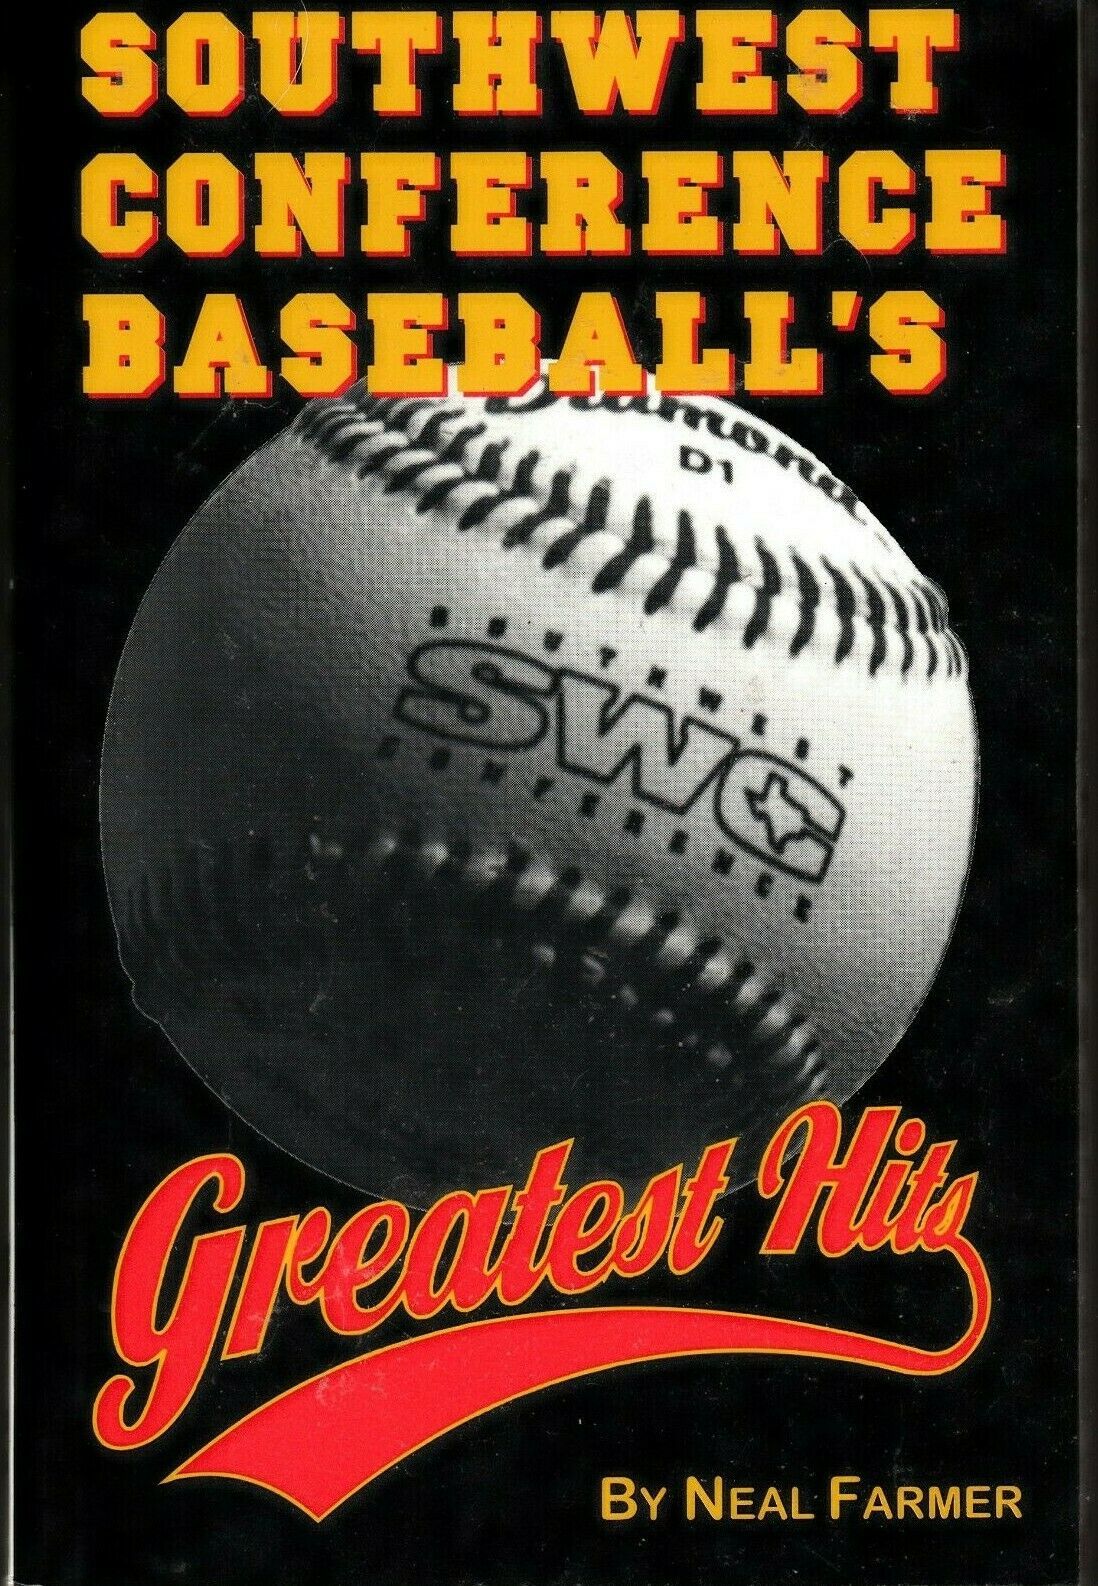 Primary image for SOUTHWEST CONFERENCE BASEBALL'S GREATEST HITS (1996) Neal Farmer Eakin Press TPB